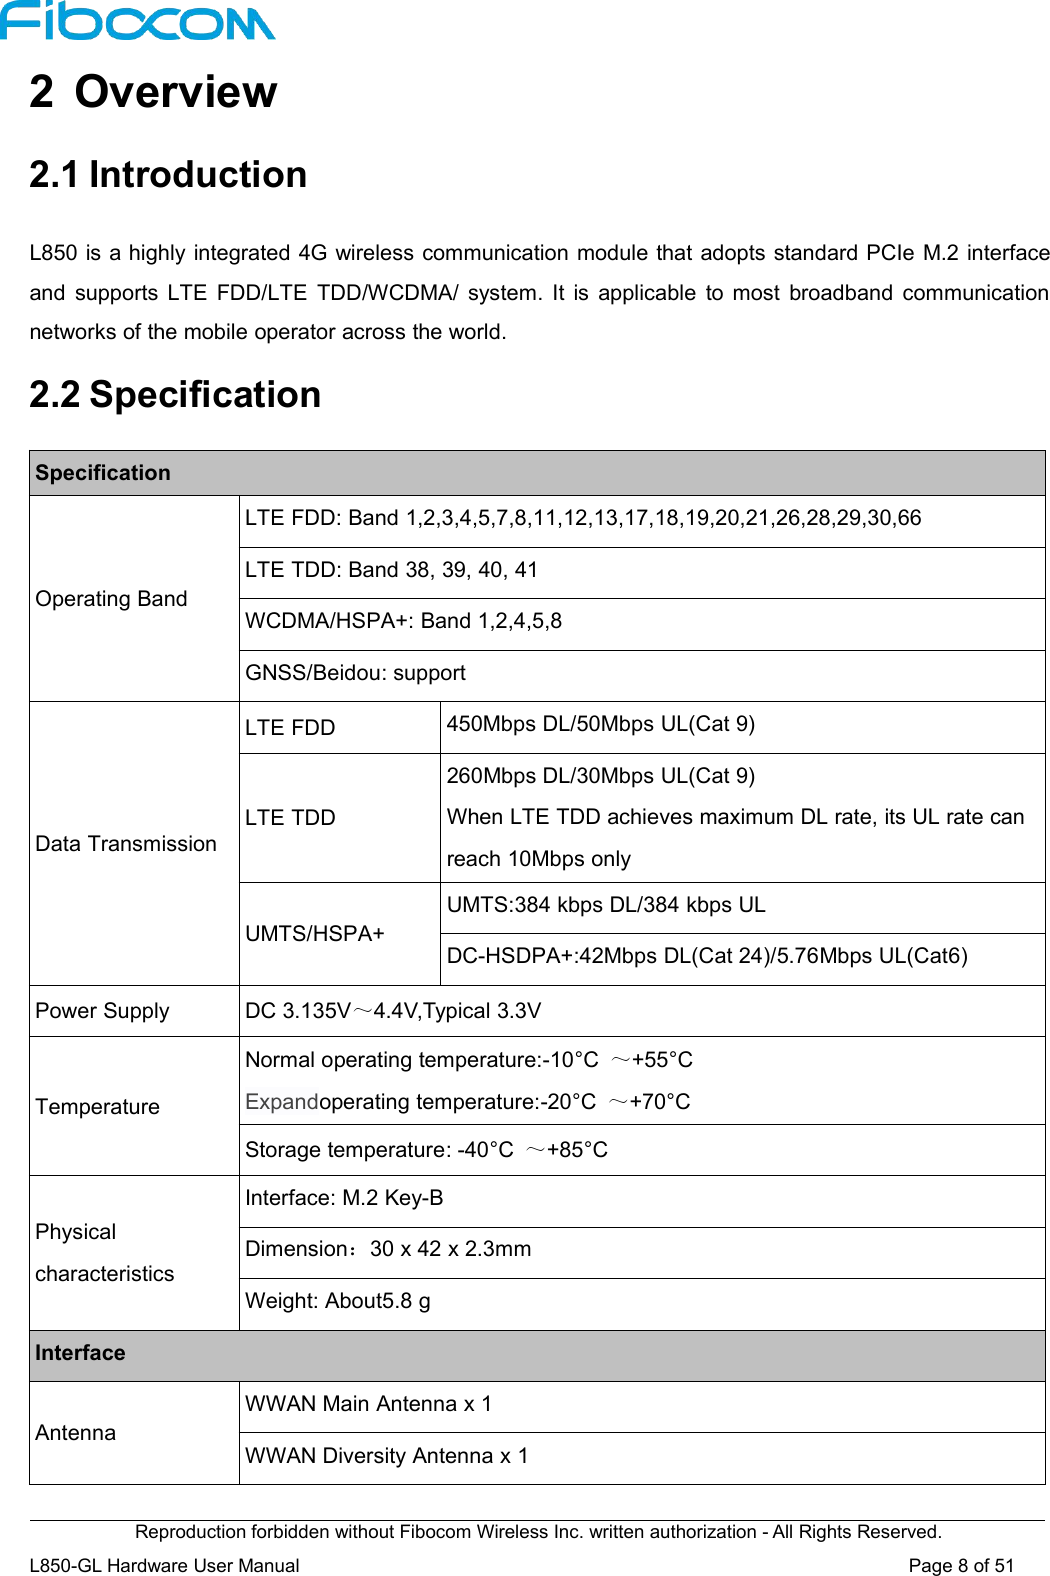 Reproduction forbidden without Fibocom Wireless Inc. written authorization - All Rights Reserved.L850-GL Hardware User Manual Page8of512 Overview2.1 IntroductionL850 is a highly integrated 4G wireless communication module that adopts standard PCIe M.2 interfaceand supports LTE FDD/LTE TDD/WCDMA/ system. It is applicable to most broadband communicationnetworks of the mobile operator across the world.2.2 SpecificationSpecificationOperating BandLTE FDD: Band 1,2,3,4,5,7,8,11,12,13,17,18,19,20,21,26,28,29,30,66LTE TDD: Band 38, 39, 40, 41WCDMA/HSPA+: Band 1,2,4,5,8GNSS/Beidou: supportData TransmissionLTE FDD450Mbps DL/50Mbps UL(Cat 9)LTE TDD260Mbps DL/30Mbps UL(Cat 9)When LTE TDD achieves maximum DL rate, its UL rate canreach 10Mbps onlyUMTS/HSPA+UMTS:384 kbps DL/384 kbps ULDC-HSDPA+:42Mbps DL(Cat 24)/5.76Mbps UL(Cat6)Power SupplyDC 3.135V～4.4V,Typical 3.3VTemperatureNormal operating temperature:-10°C ～+55°CExpandoperating temperature:-20°C ～+70°CStorage temperature: -40°C ～+85°CPhysicalcharacteristicsInterface: M.2 Key-BDimension：30 x 42 x 2.3mmWeight: About5.8 gInterfaceAntennaWWAN Main Antenna x 1WWAN Diversity Antenna x 1